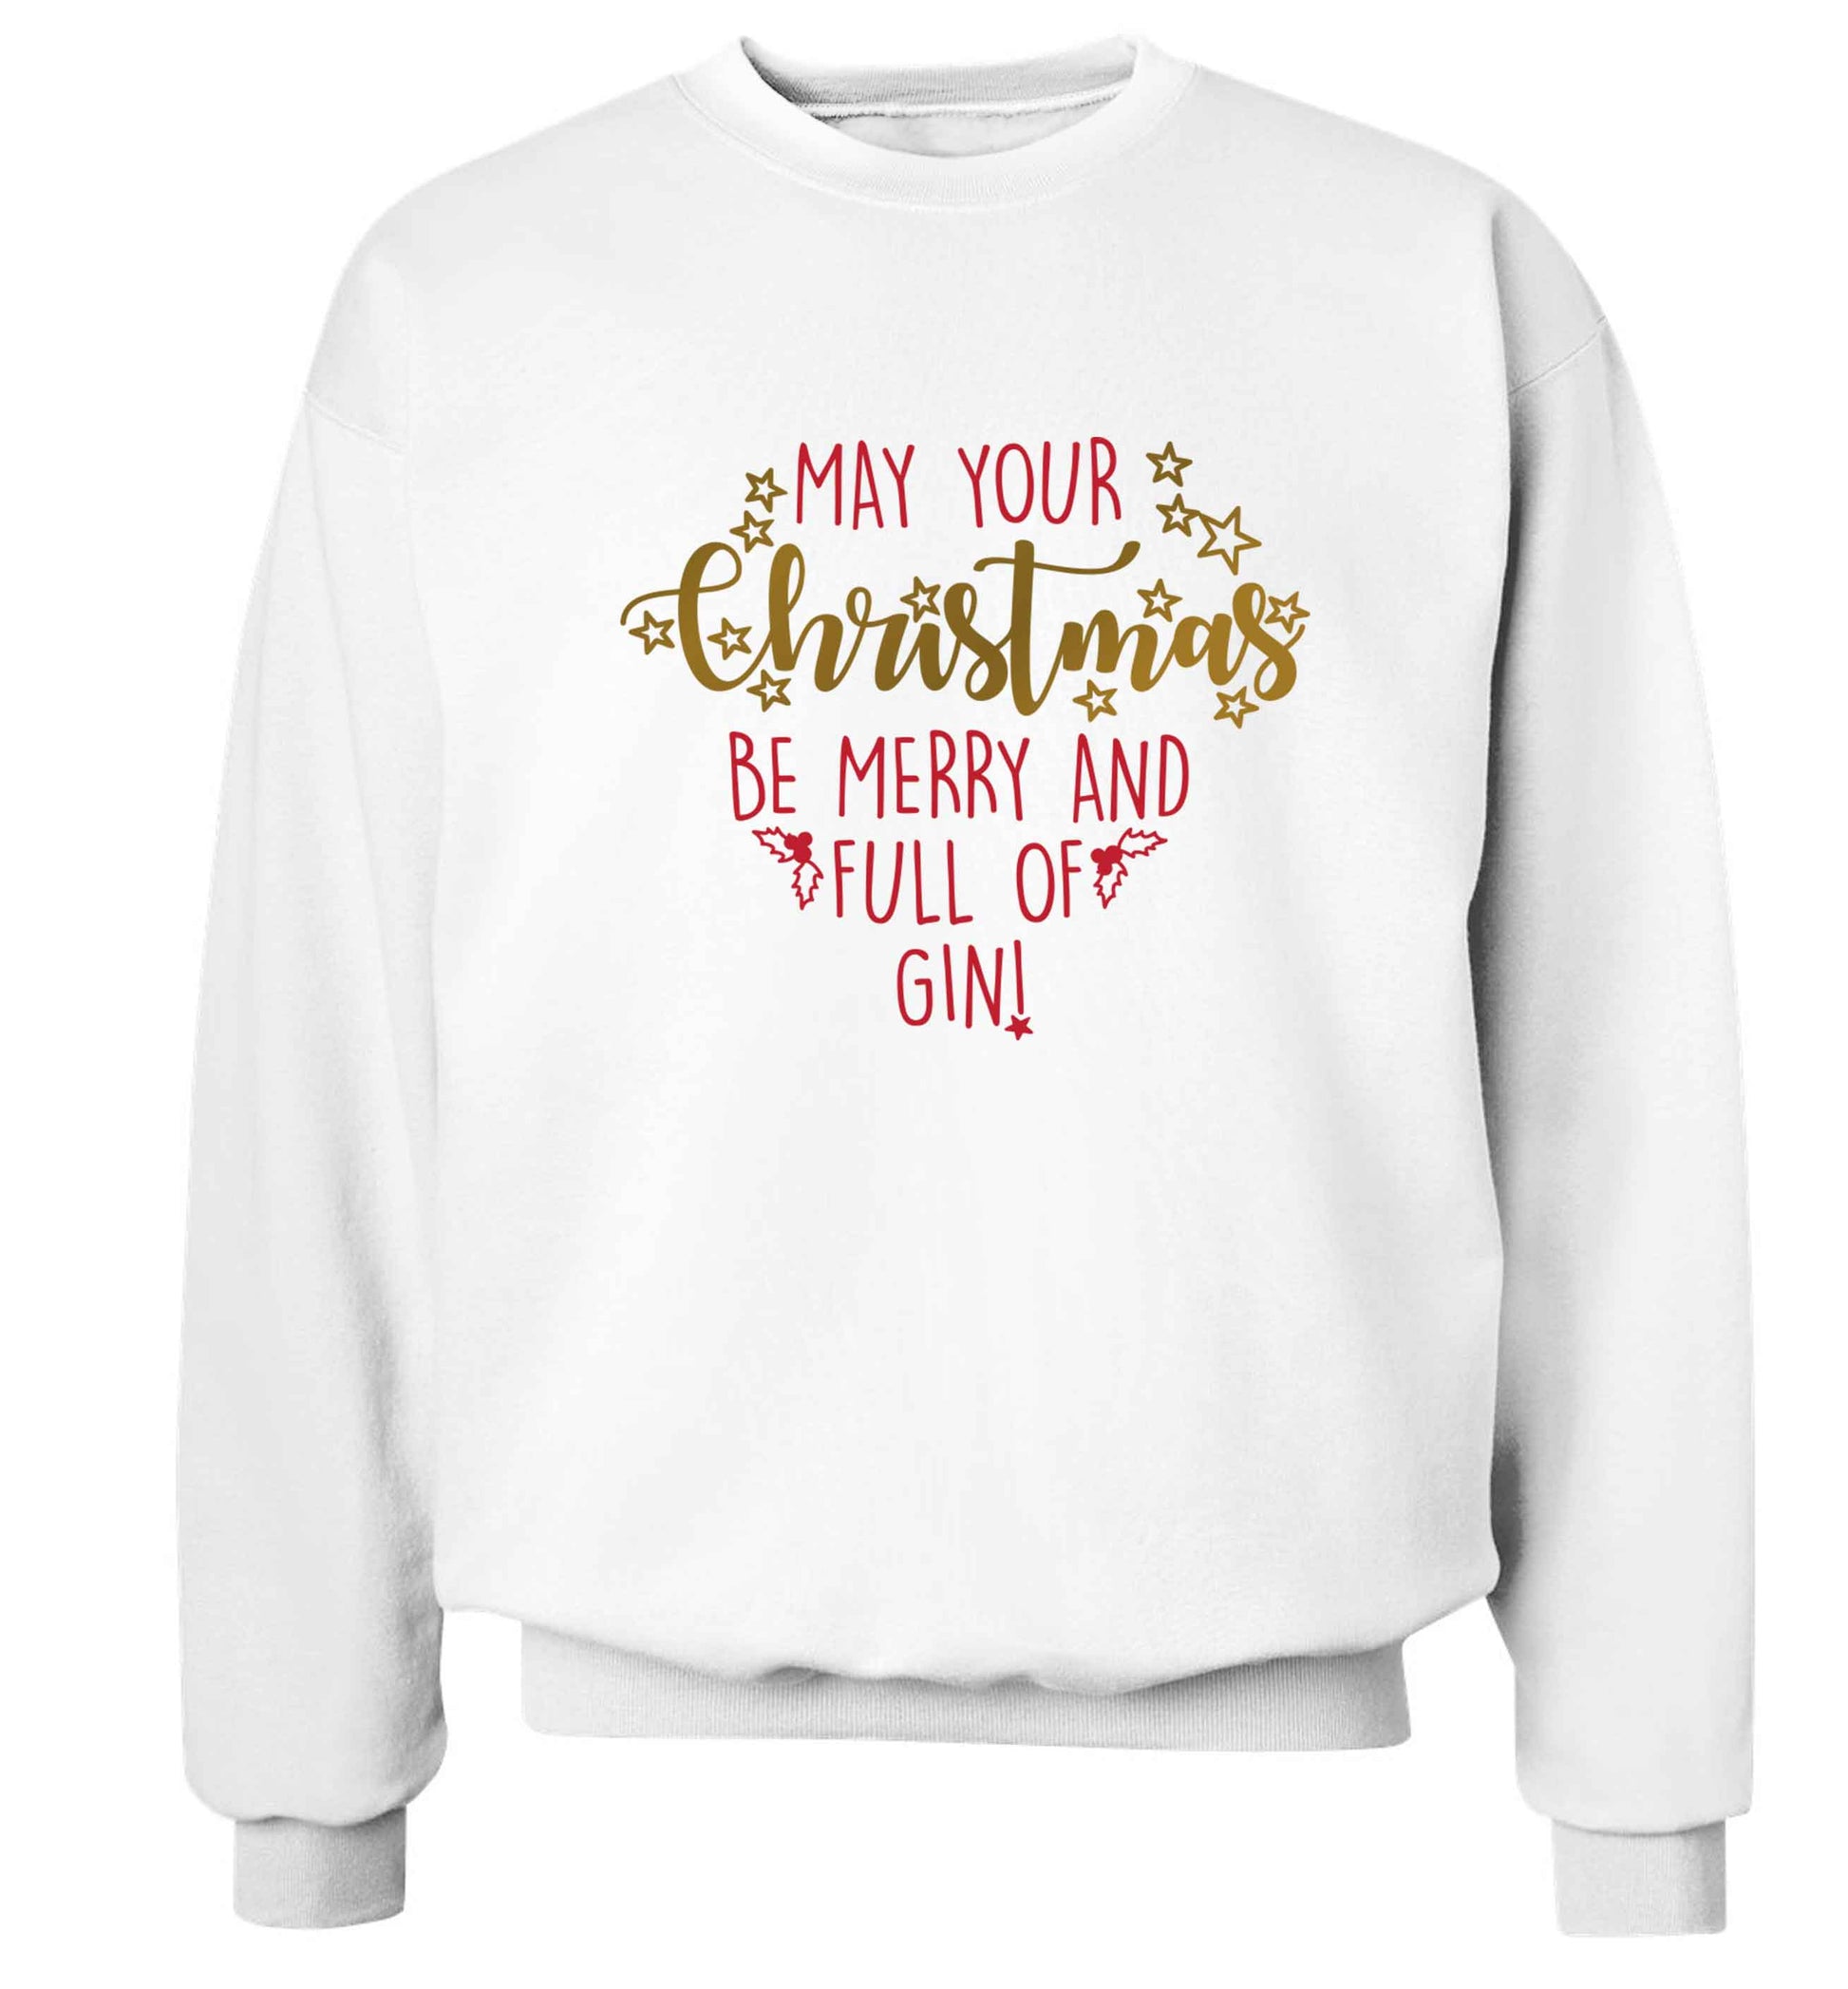 May your Christmas be merry and full of gin Adult's unisex white Sweater 2XL